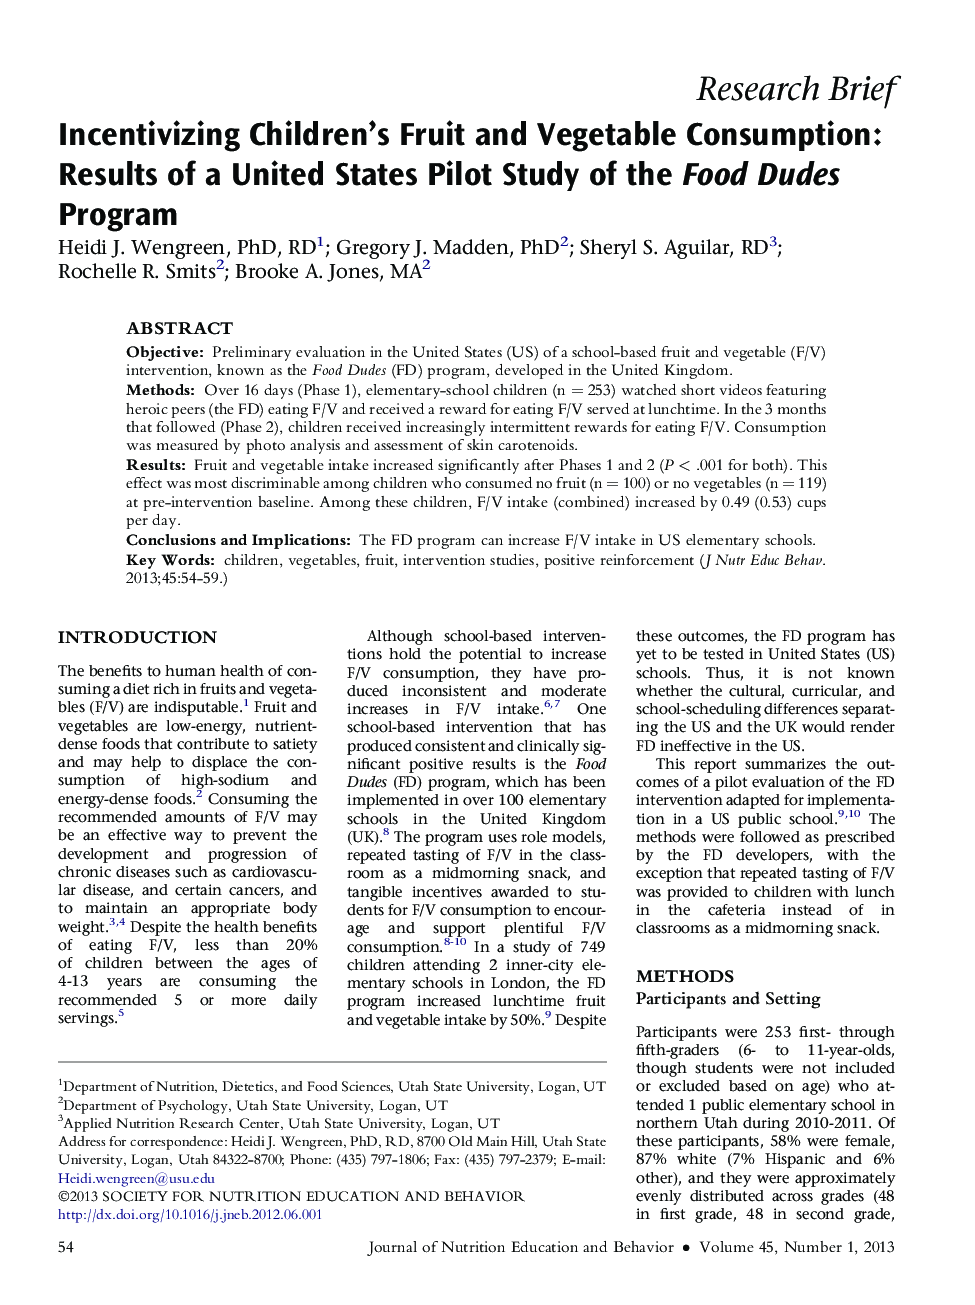 Incentivizing Children's Fruit and Vegetable Consumption: Results of a United States Pilot Study of the Food Dudes Program